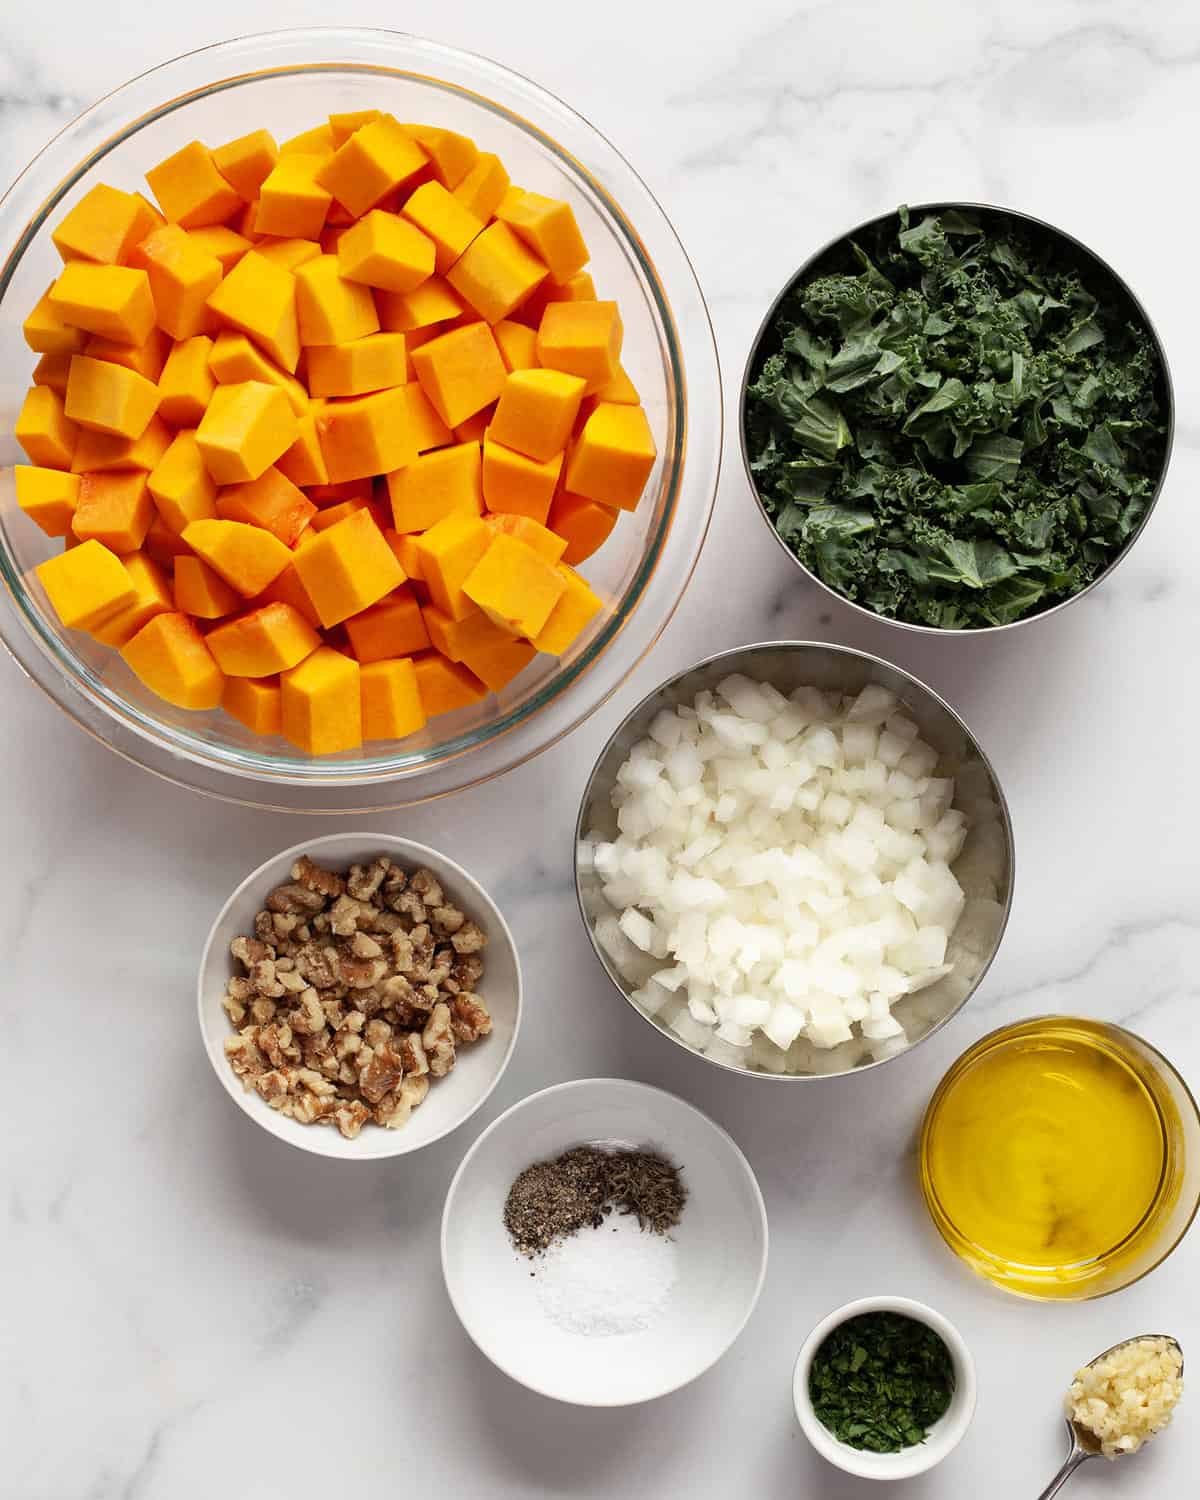 Ingredients including butternut squash, kale, onions, walnuts, olive oil, spices and parsley.